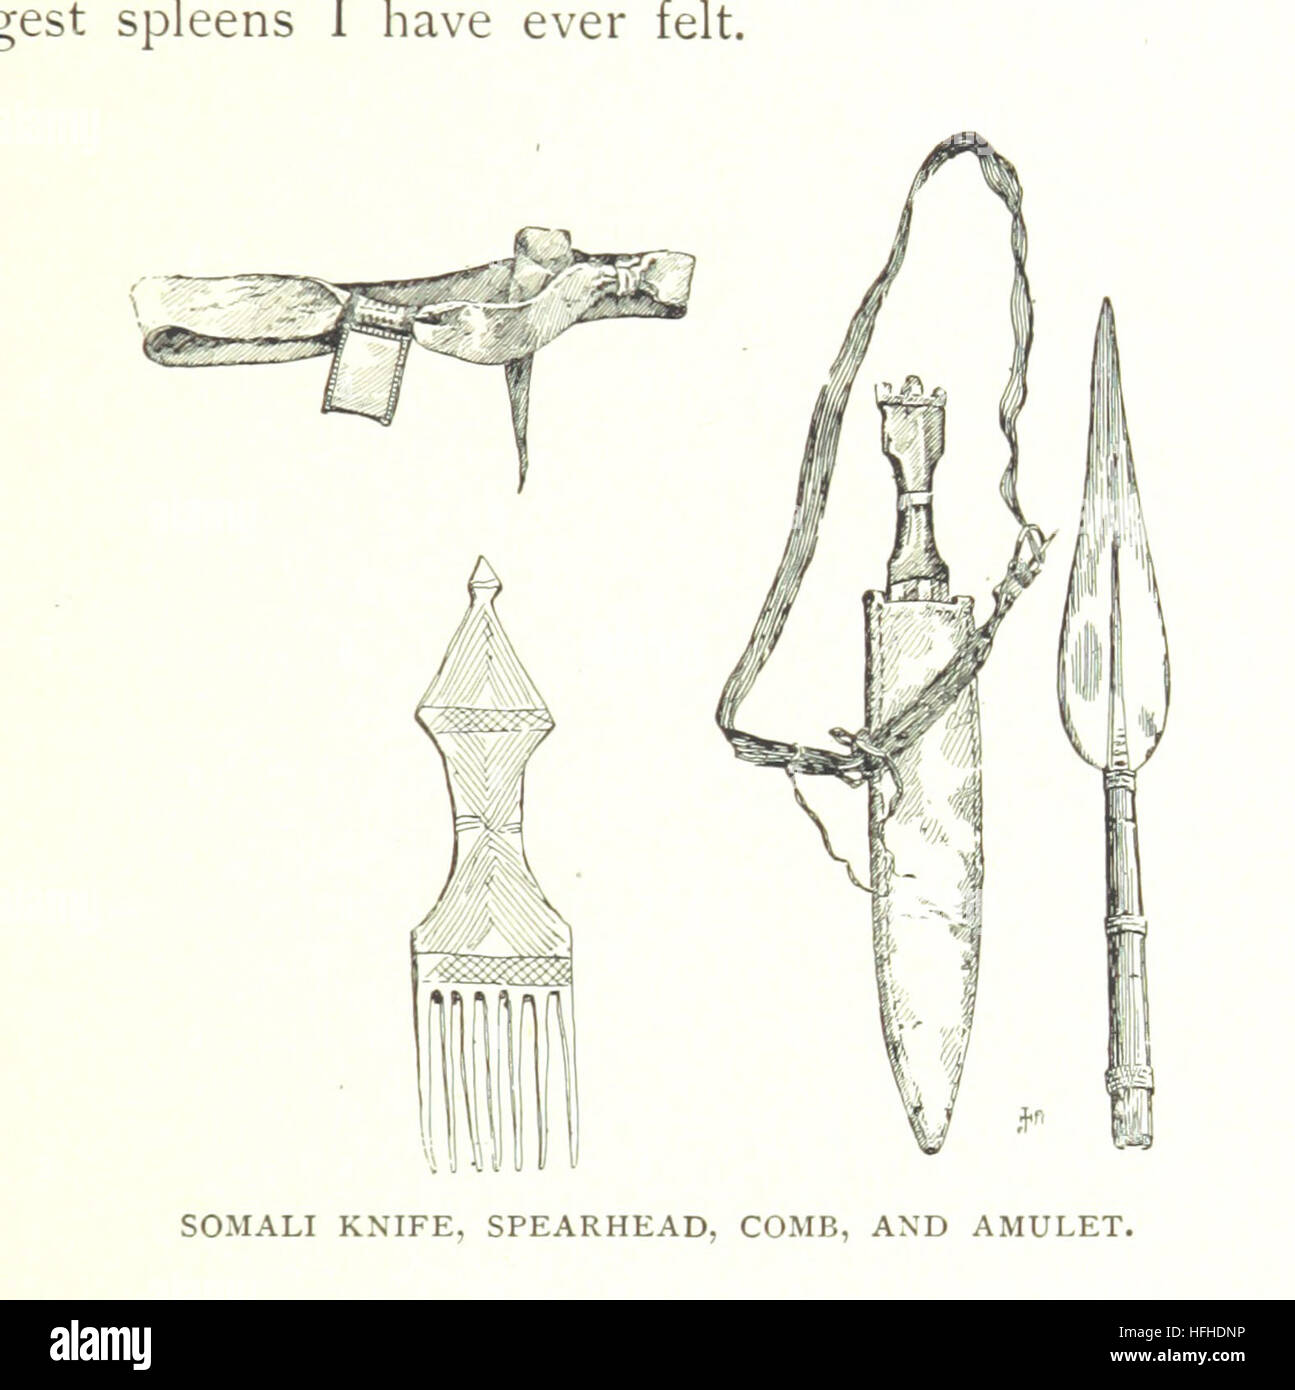 Image taken from page 155 of 'Through Unknown African Countries. The first expedition from Somaliland to Lake Lamu ... Illustrated. [With maps.]' Image taken from page 155 of 'Through Unknown African Countries Stock Photo